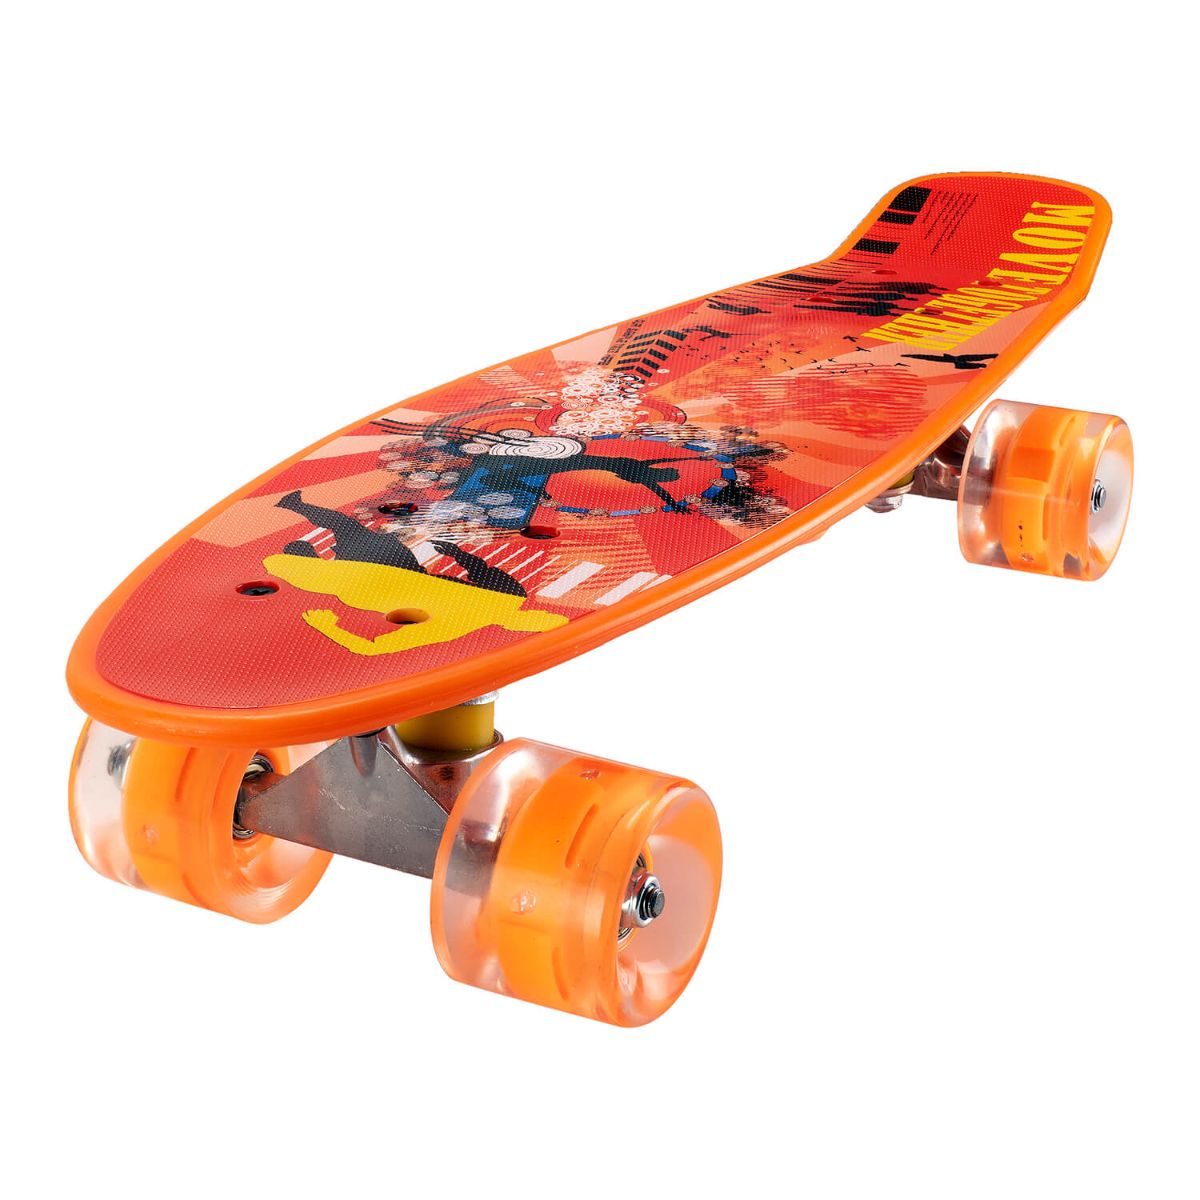 Penny board Action One, Cu roti luminoase, 22 cm, ABEC-7 PU, Aluminium 90 kg, Move Together Action One